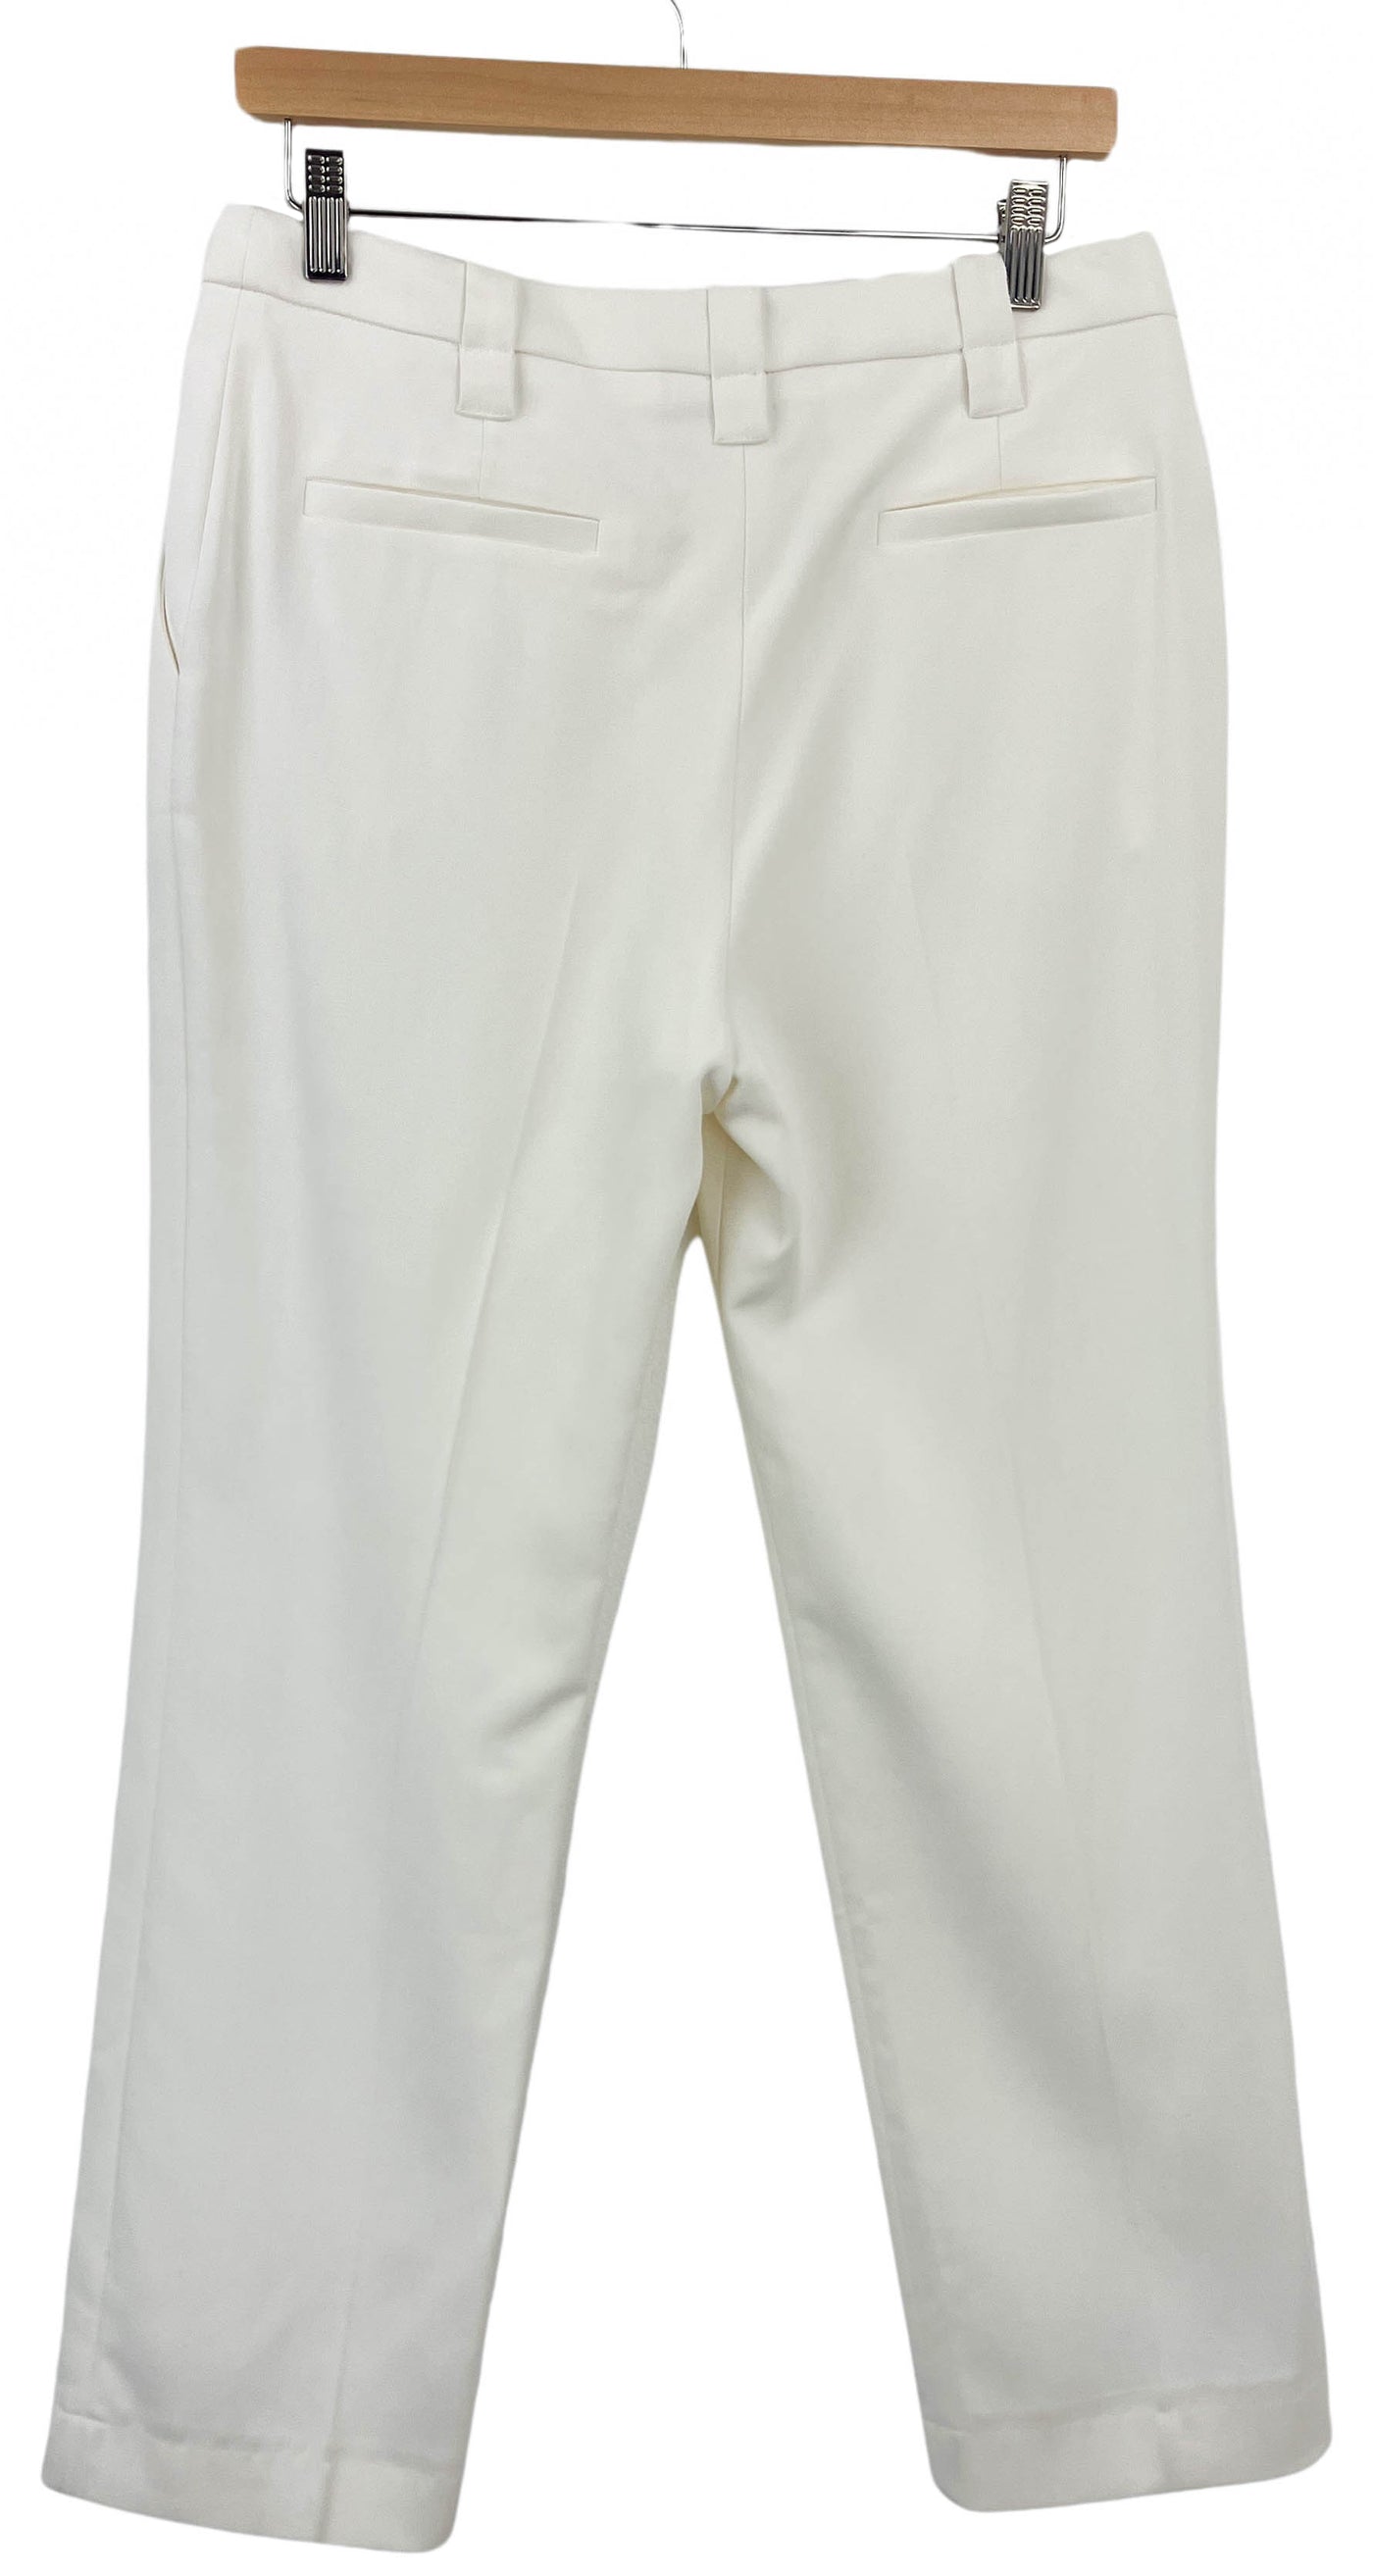 Proenza Schouler Cropped Suiting Tailored Trousers in Off-White - Discounts on Proenza Schouler at UAL